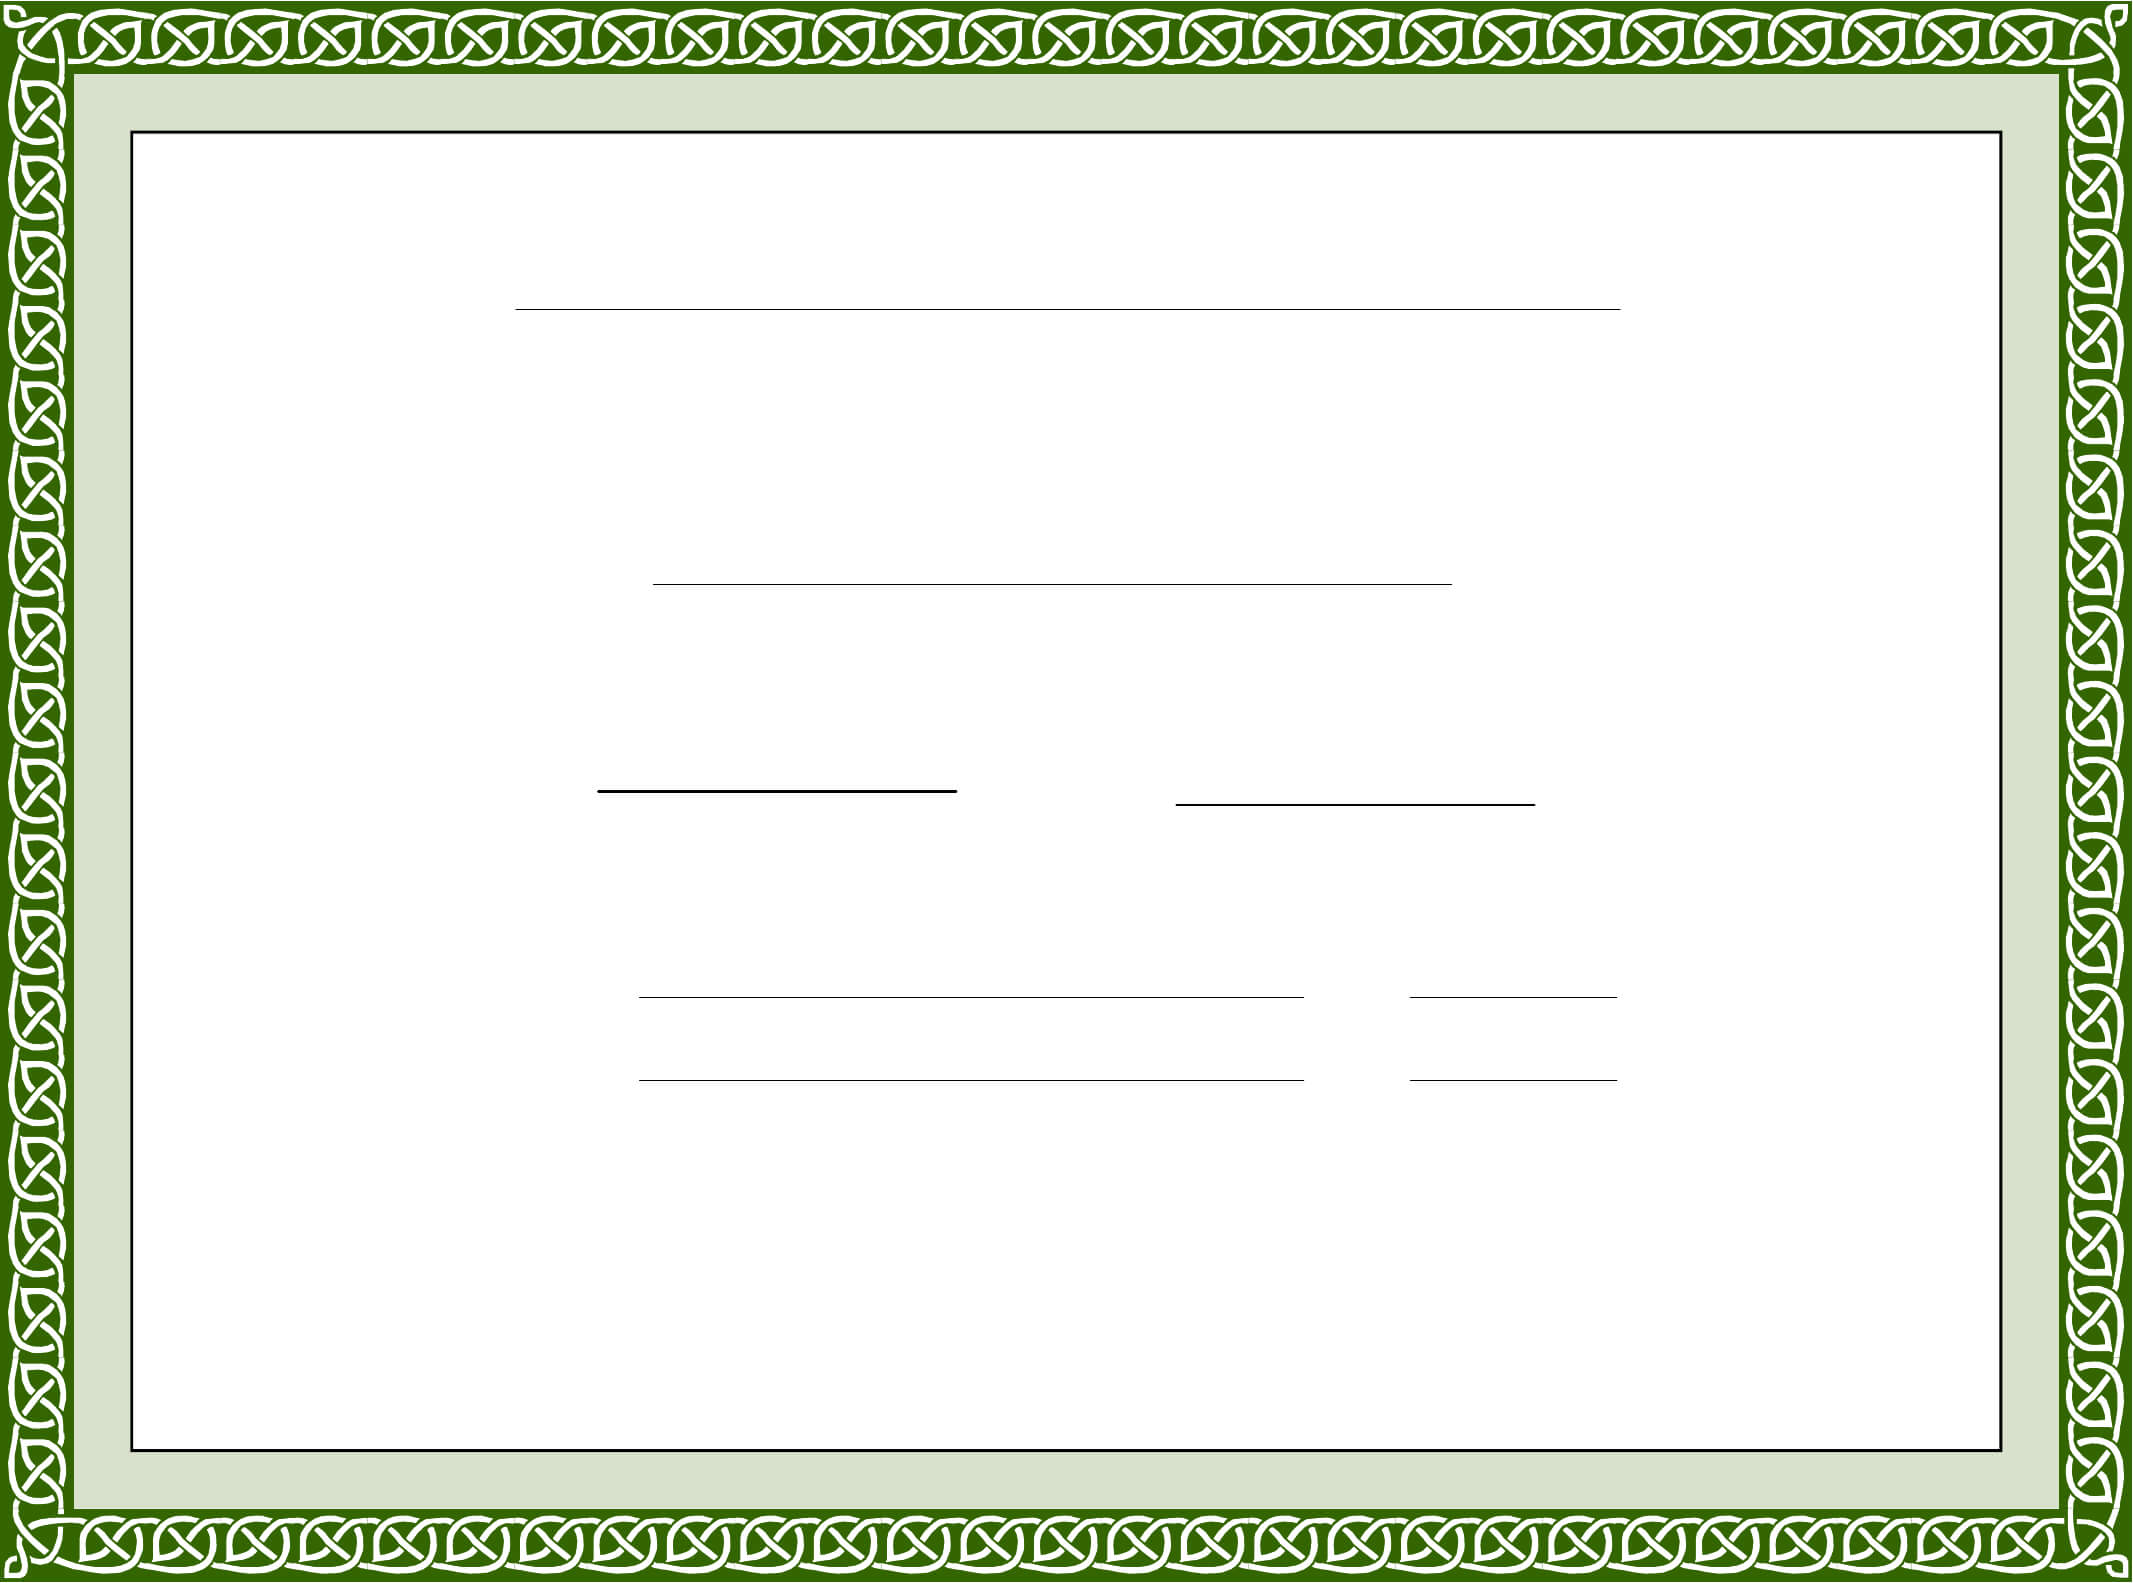 Training Certificate Template Free Download - Calep with ...
 Blank Certificate Templates For Word Free